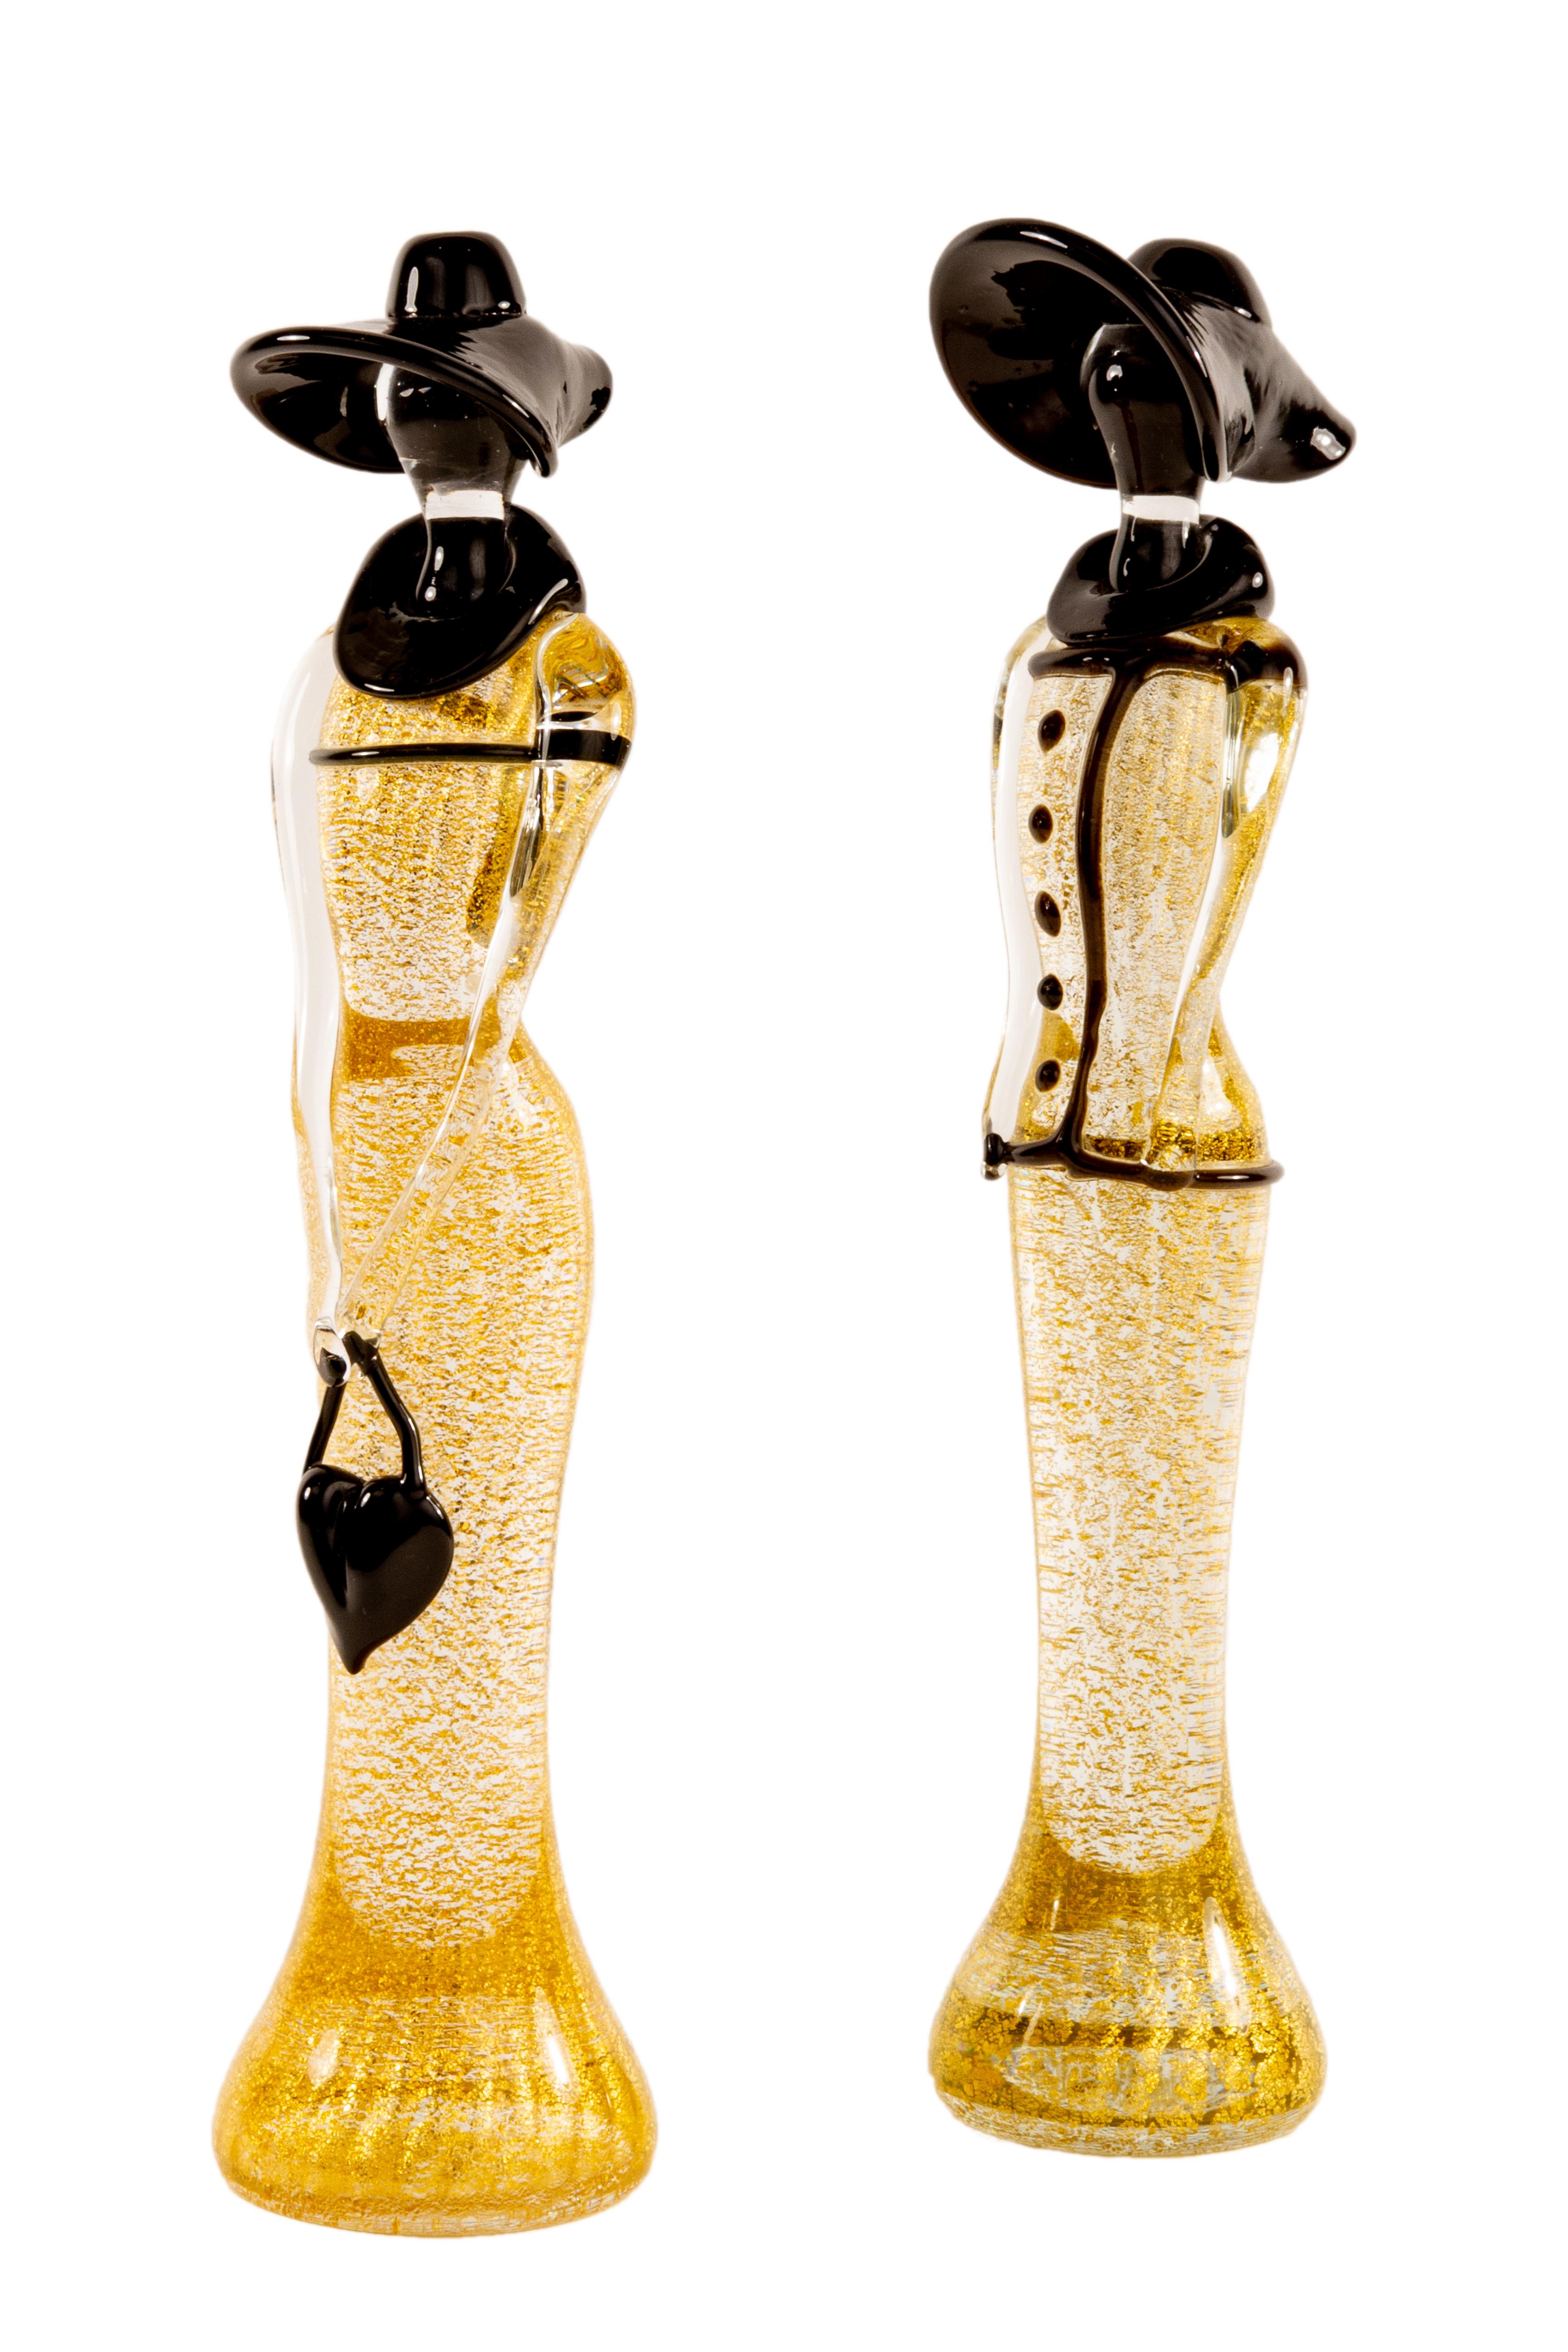 A pair of Mid-Century Modern Italian blown glass sculpture figurines by, Mario Badioli for Ogetti. Each figurine in 1920s' style depicts two females; one figure wearing a large black hat and buttoned blouse and the other figure with a purse. The